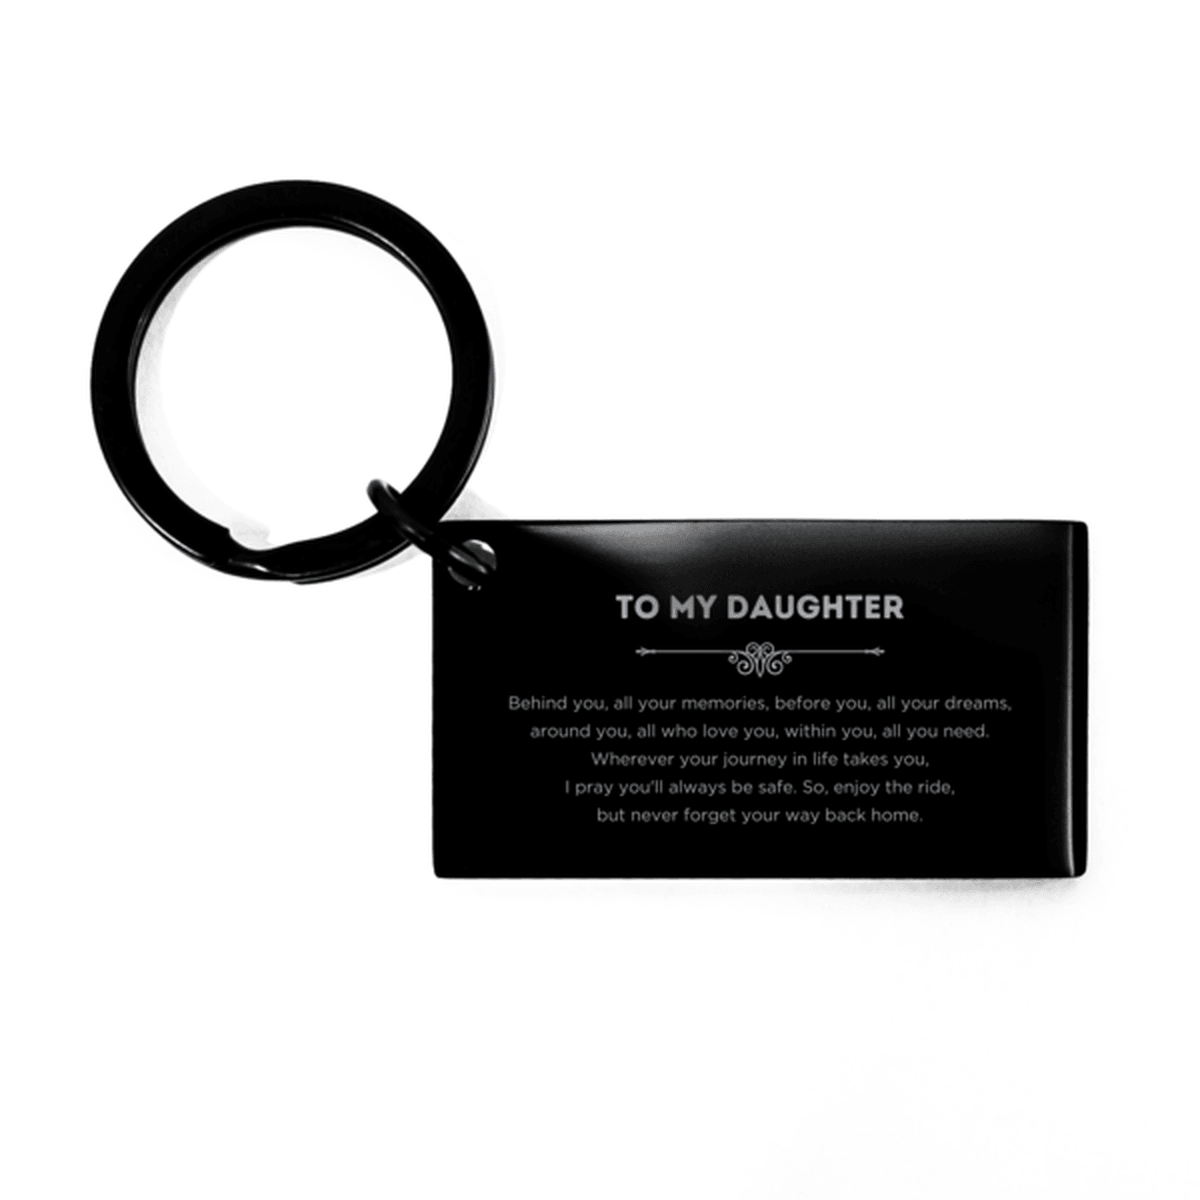 Daughter Keychain Birthday Christmas Unique Gifts Behind you, all your memories, before you, all your dreams - Mallard Moon Gift Shop